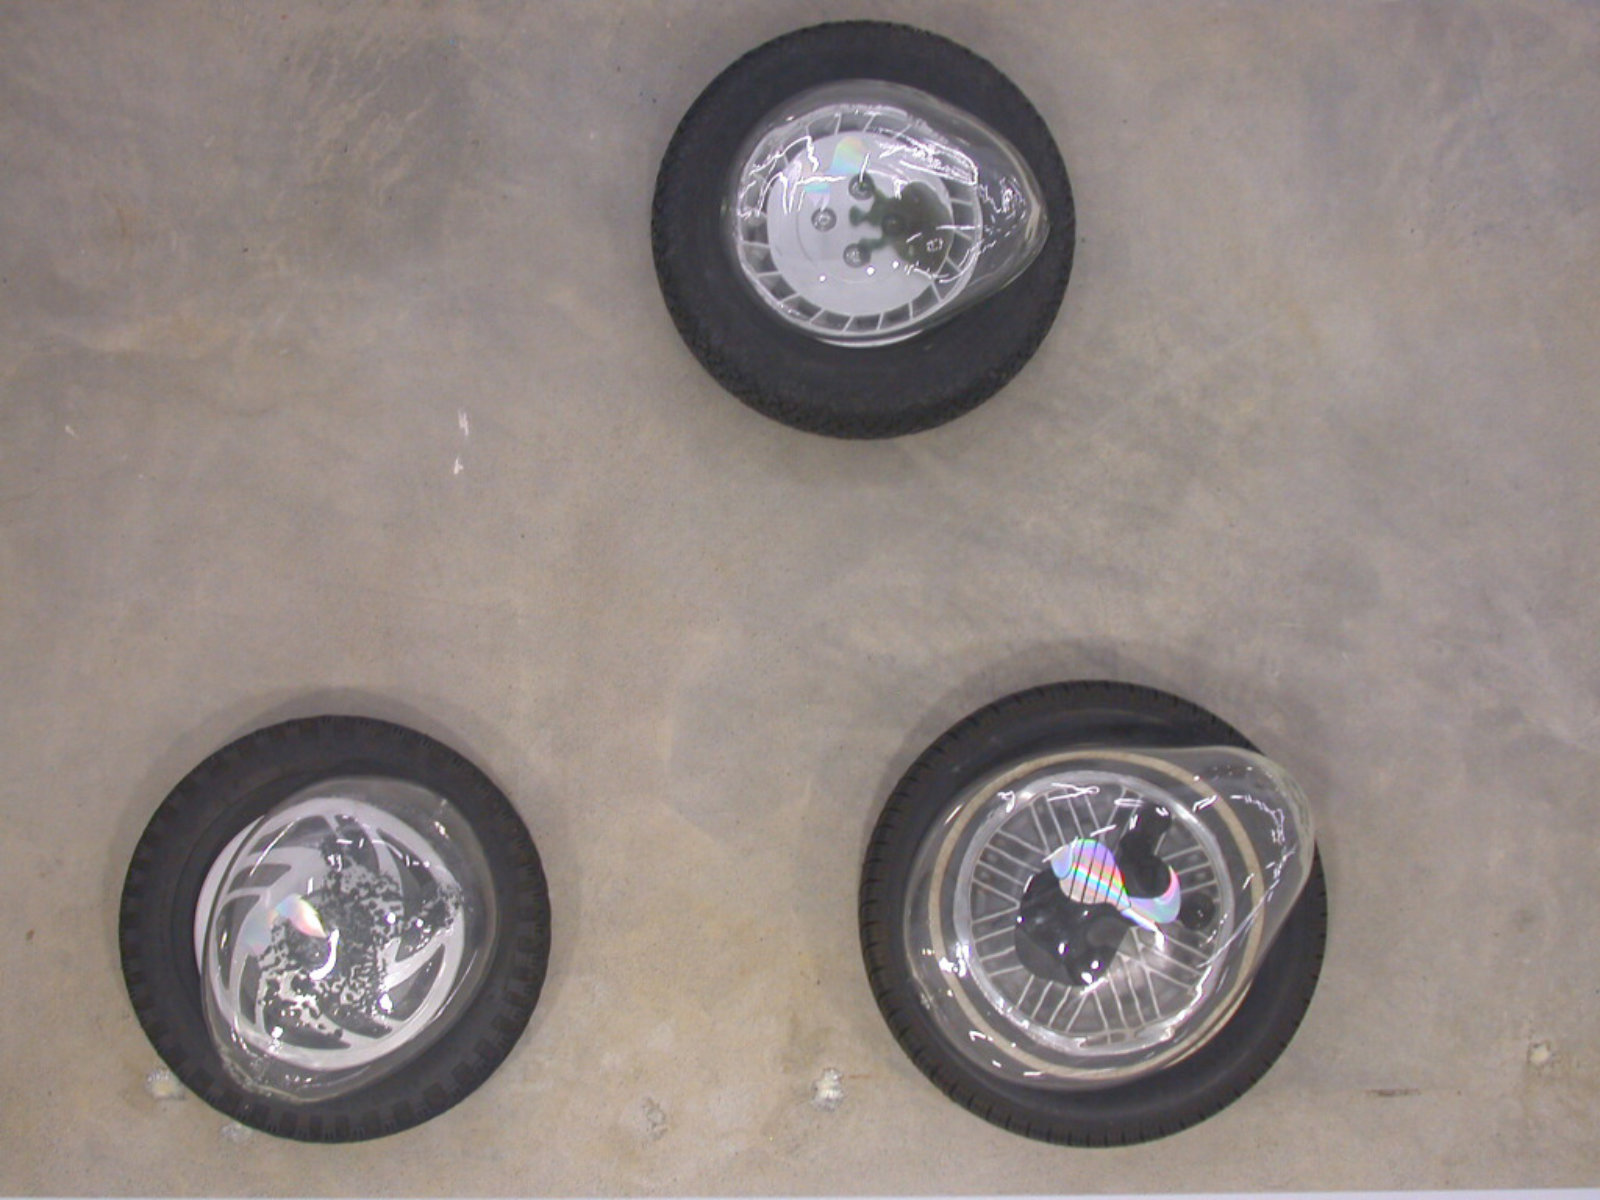 Jerry Pethick, Aerial View, 2001–2002, tires, spectrafoil cut-outs, black silicone, blown glass, dimensions variable